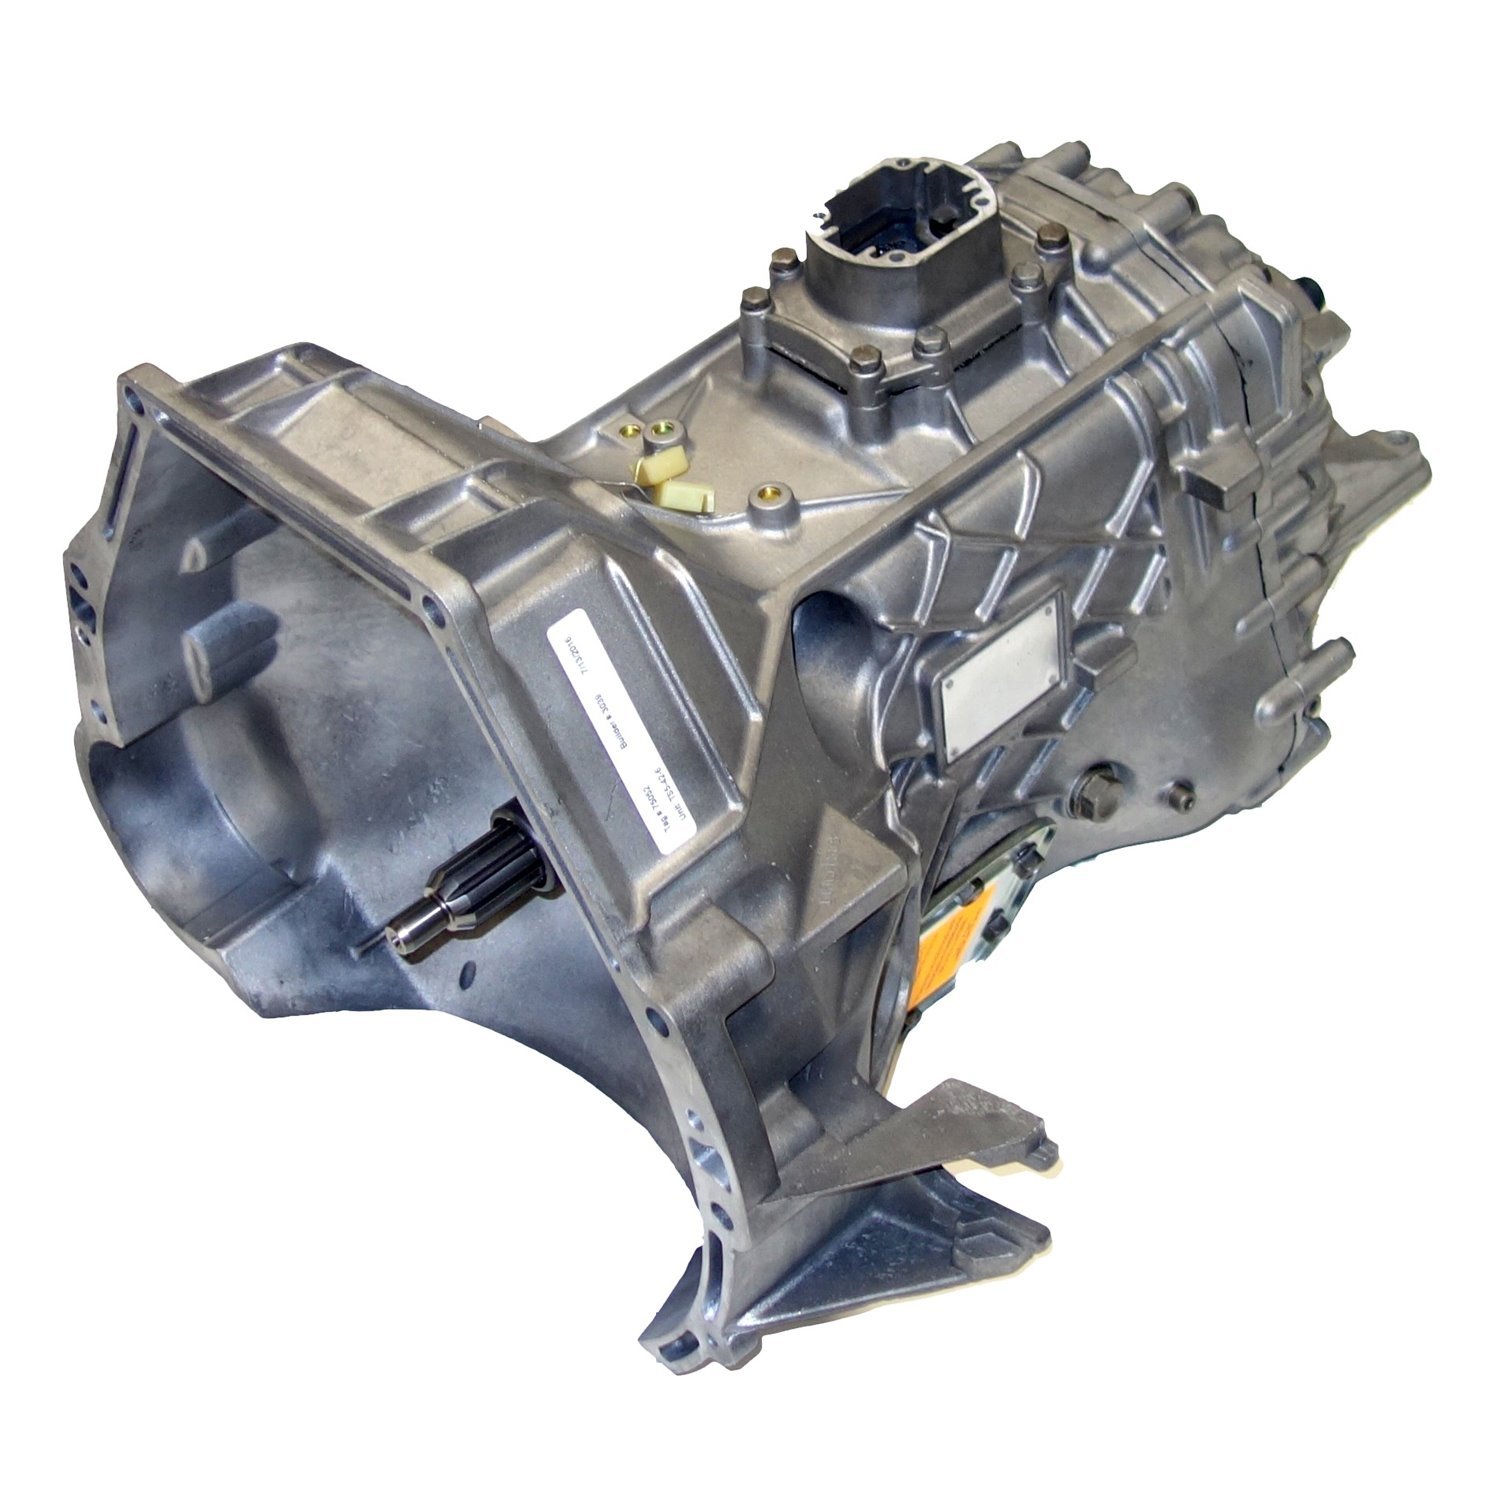 Remanufactured S5-42 Manual Transmission for Ford 87-92 F-series 4.9L & 5.8L, 2WD